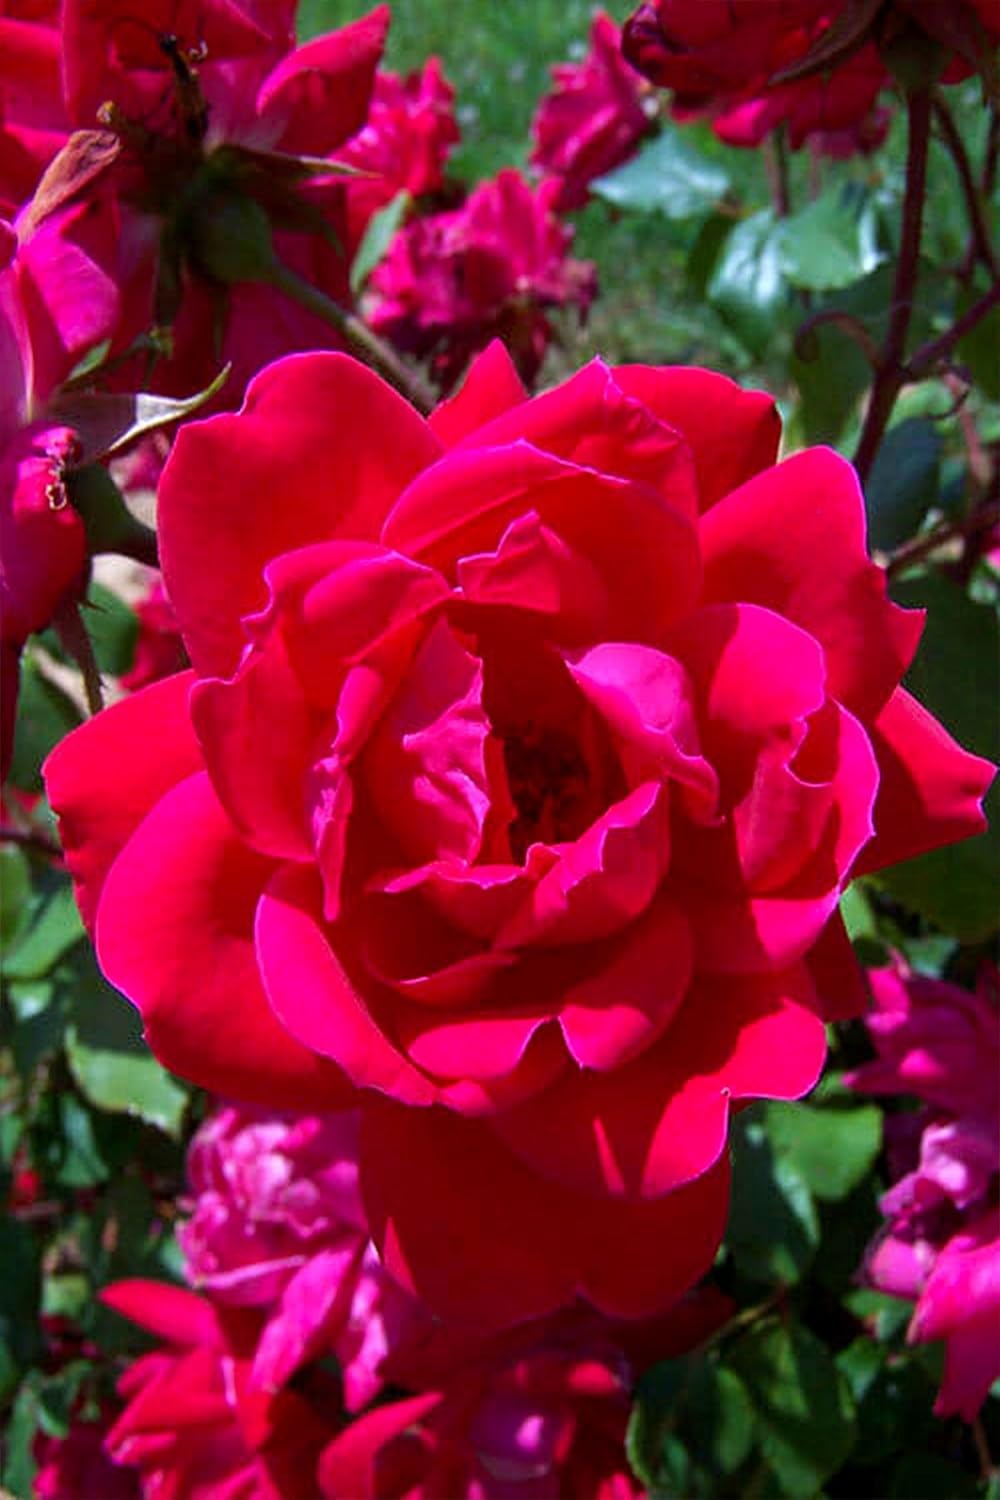 Double Knock Out rose